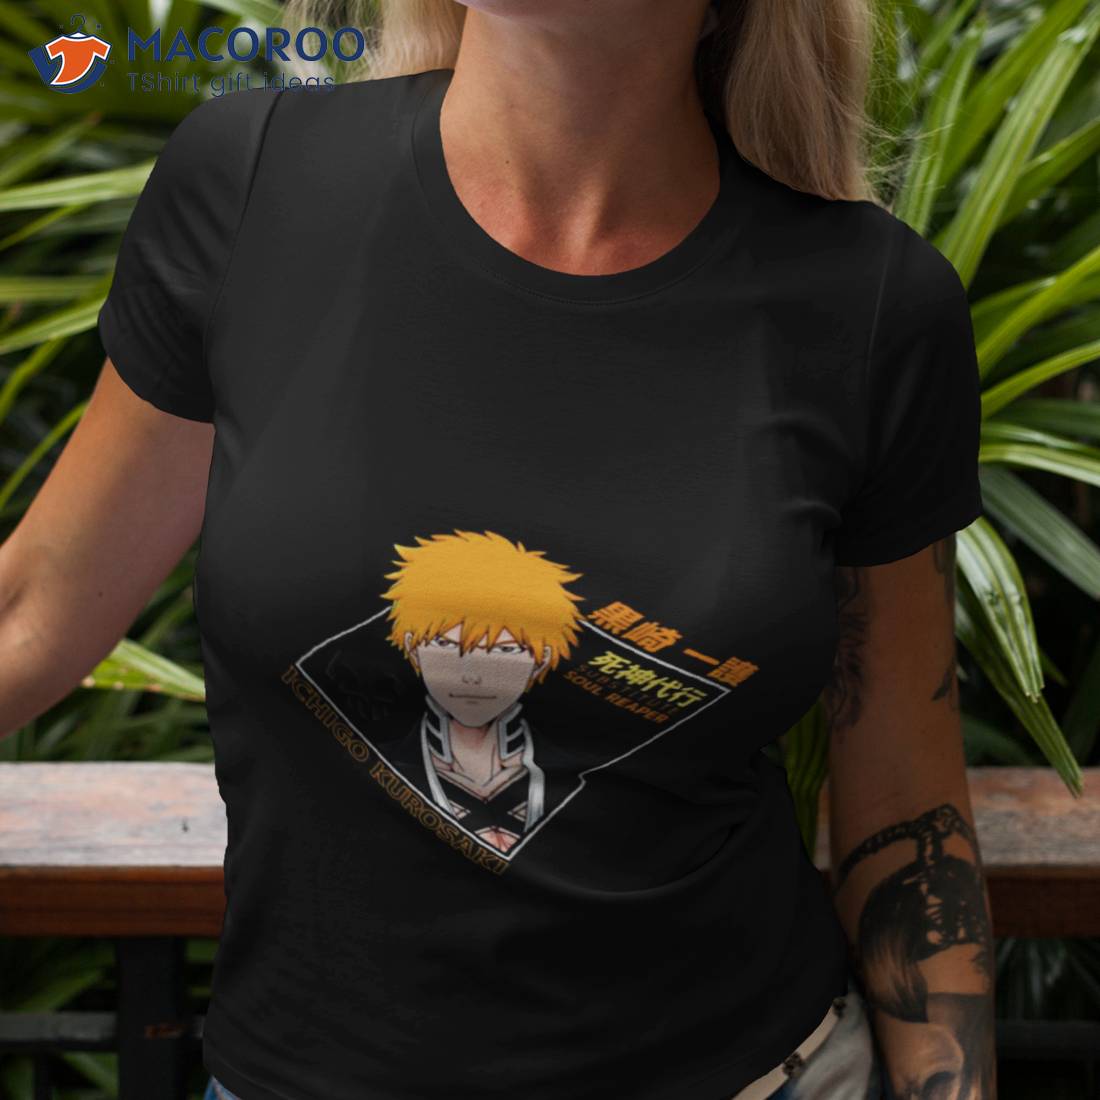 10 Best Bleach Anime Shirts for Men and Womenand Death Gods 